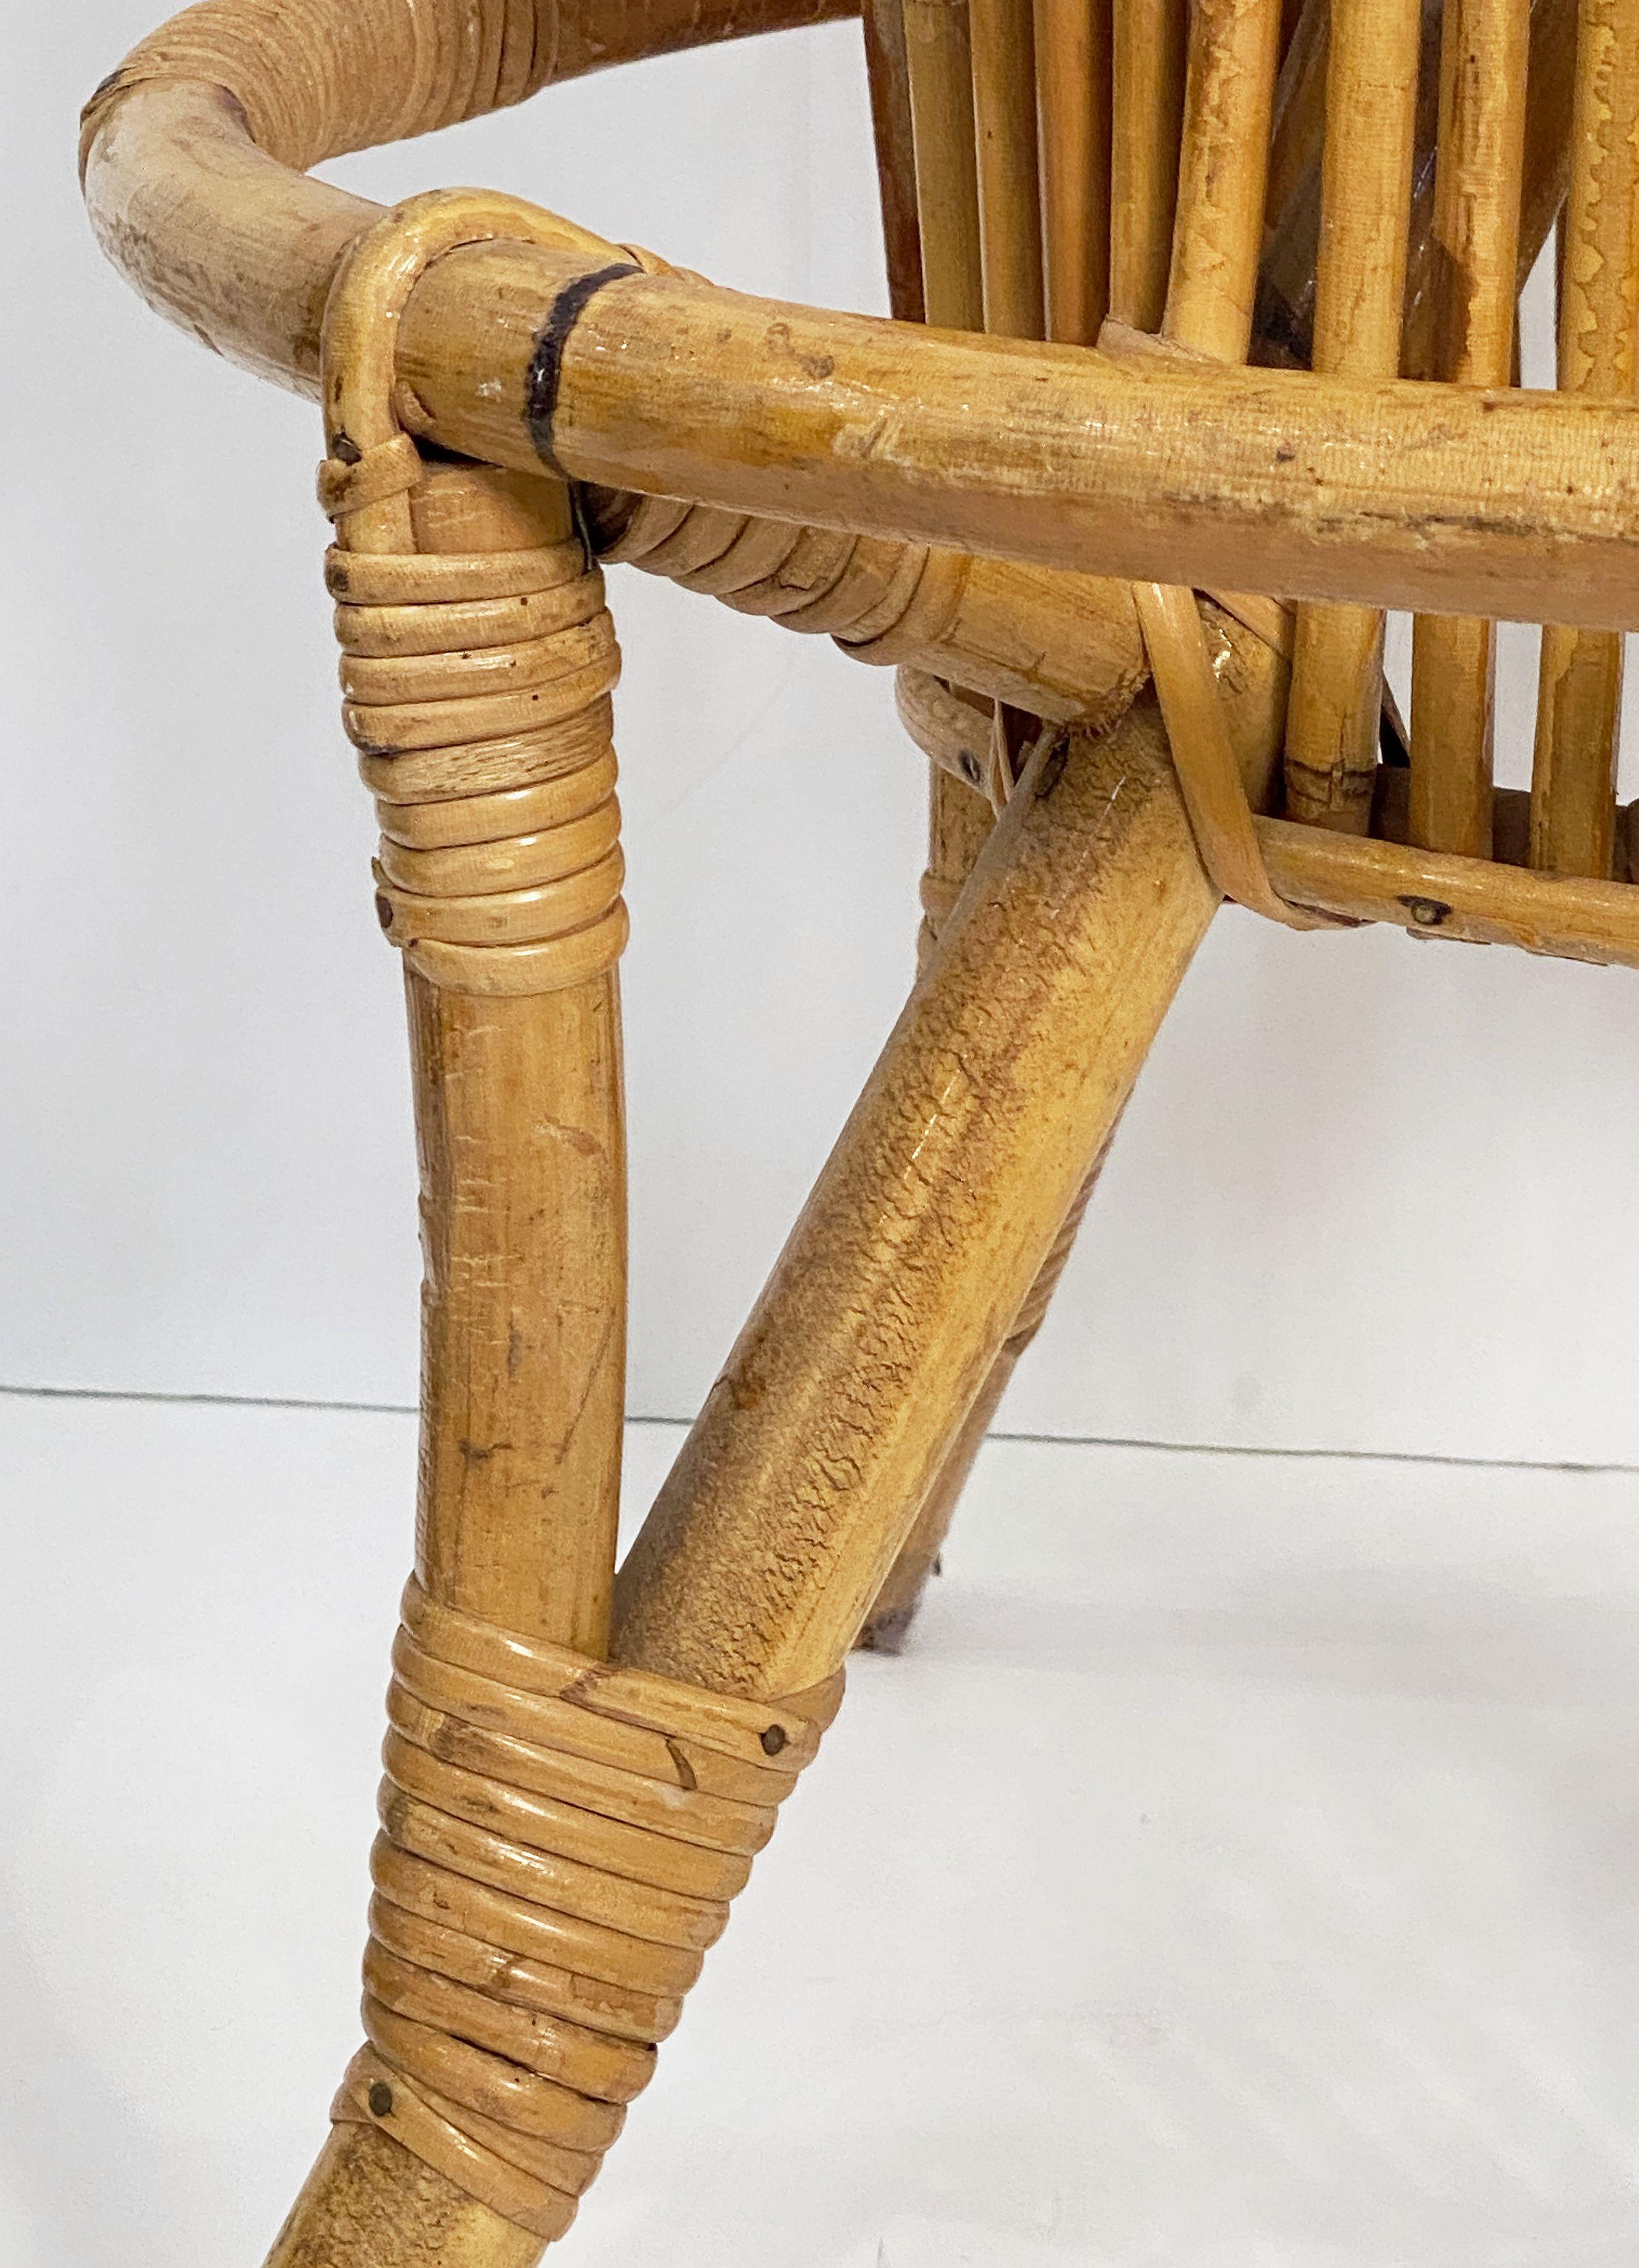 Italian Stool of Rattan and Bamboo from the Mid-20th Century For Sale 13